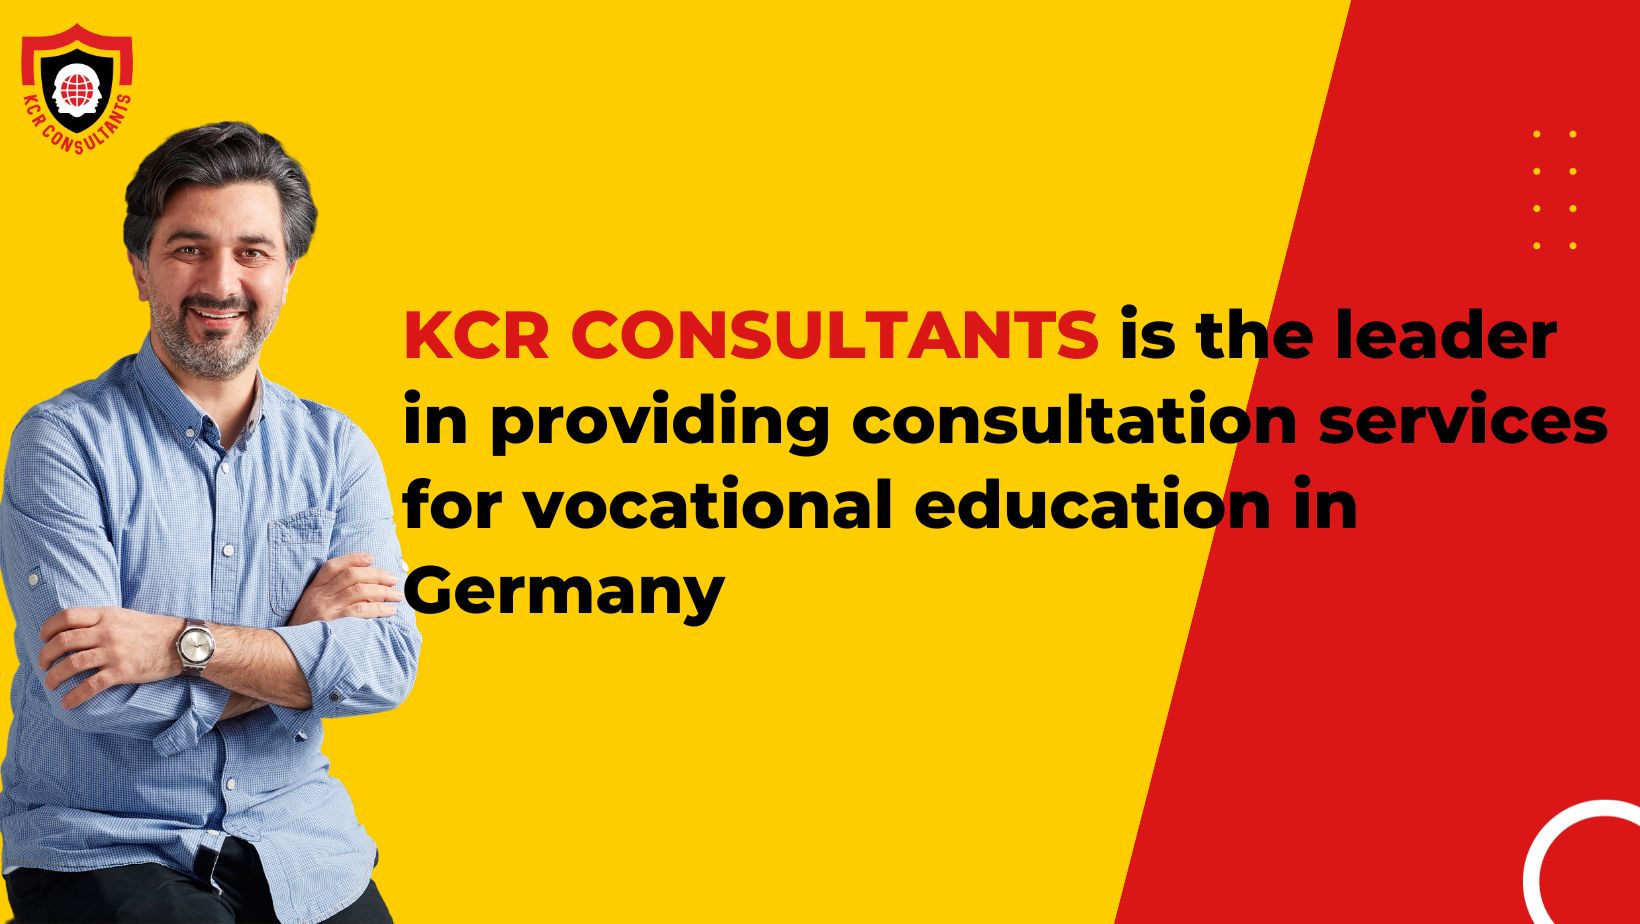 The German Vocational Training Model - KCR CONSULTANTS - Contact us 